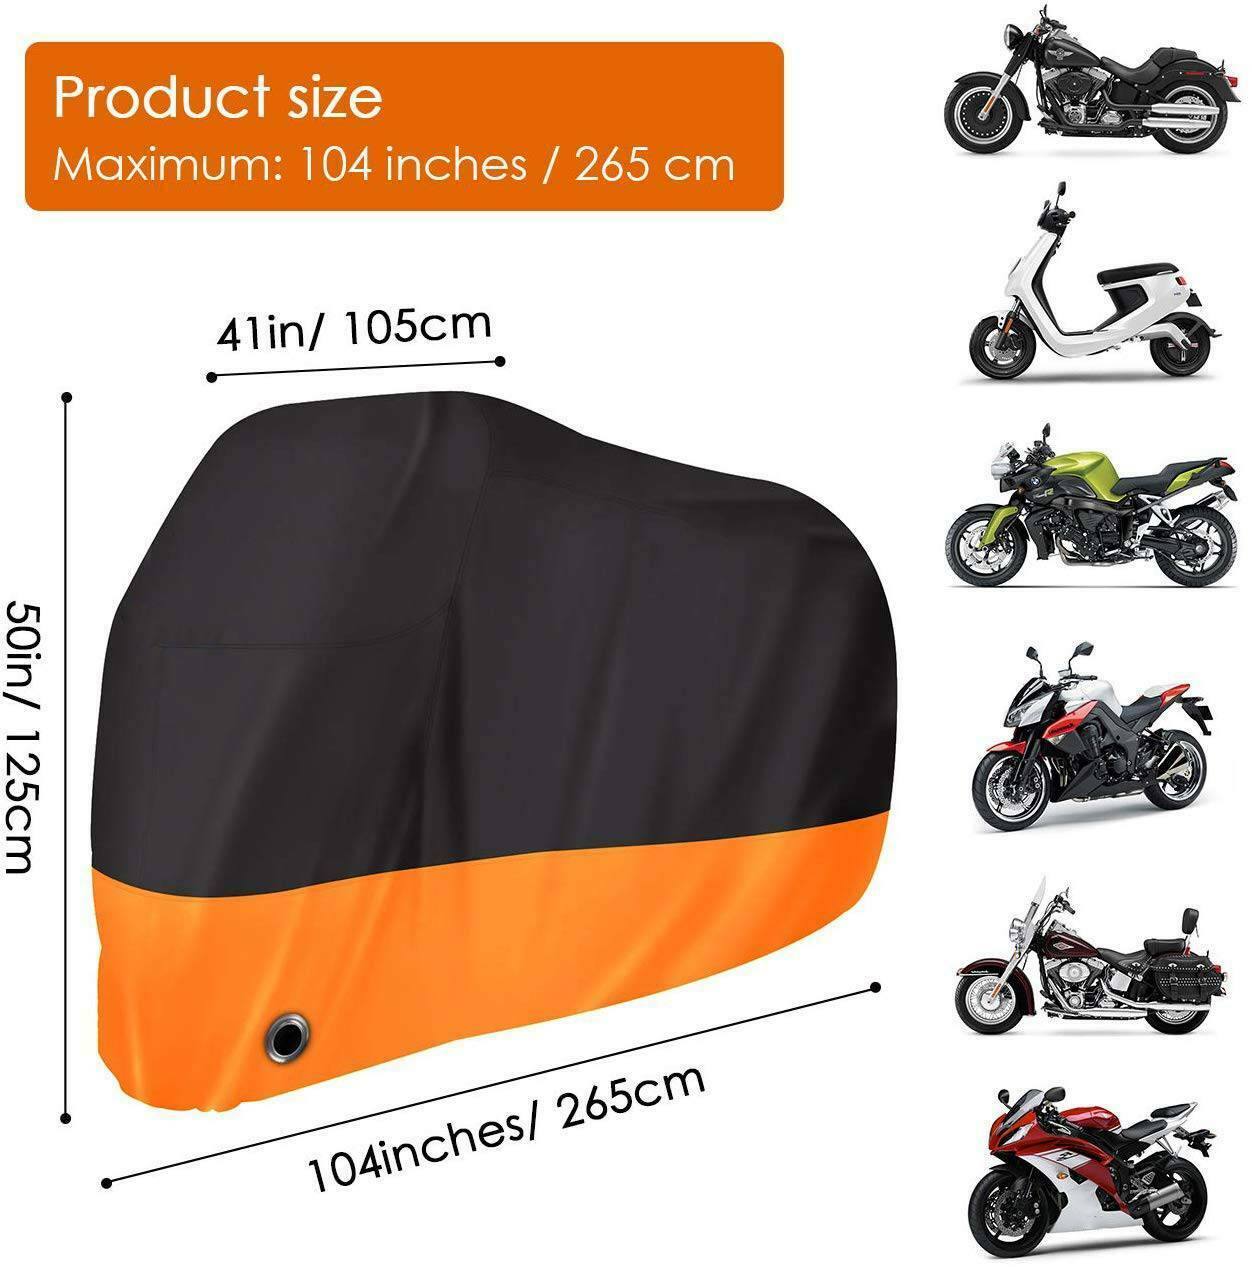 XXL Heavy Duty Motorcycle Cover Waterproof Bike Outdoor Rain Dust UV Protector A - Moto Life Products